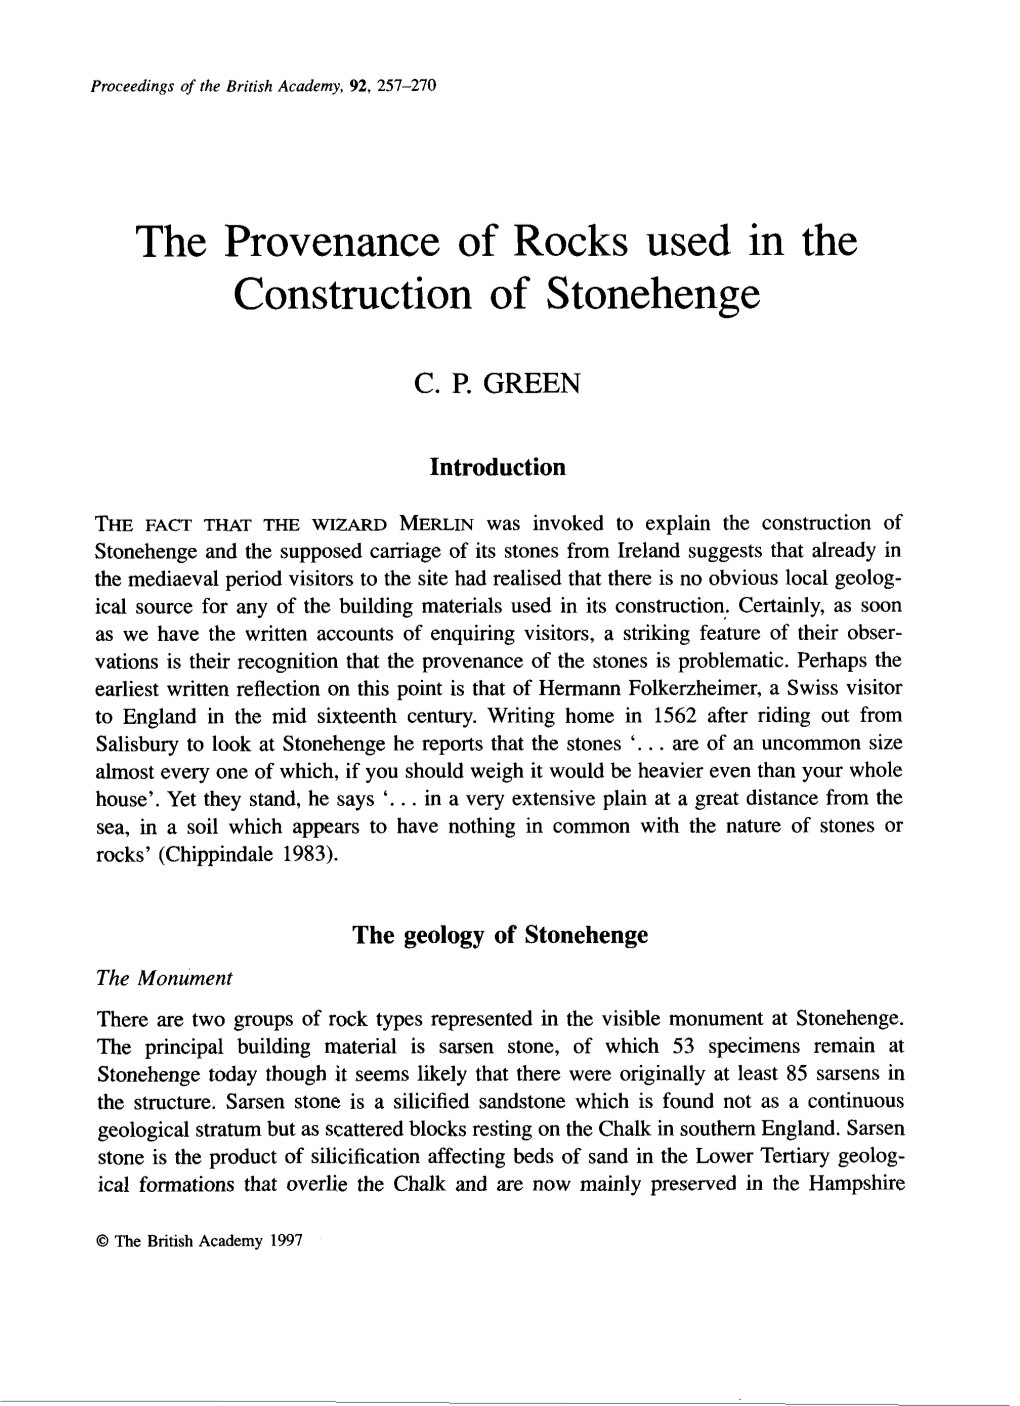 The Provenance of Construction of Rocks Used in Stonehenge